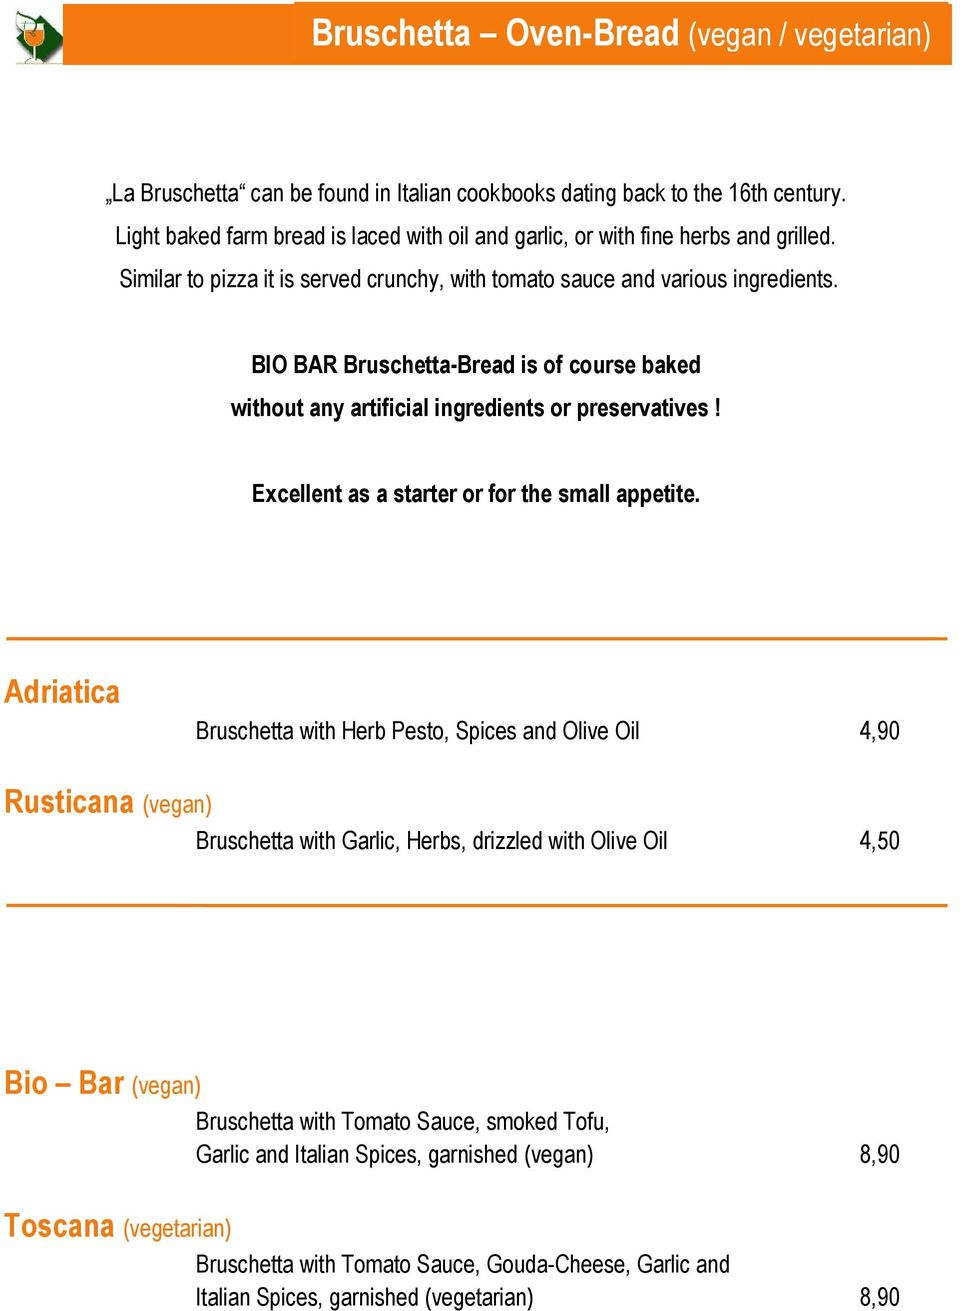 BIO BAR Bruschetta-Bread is of course baked without any artificial ingredients or preservatives! Excellent as a starter or for the small appetite.